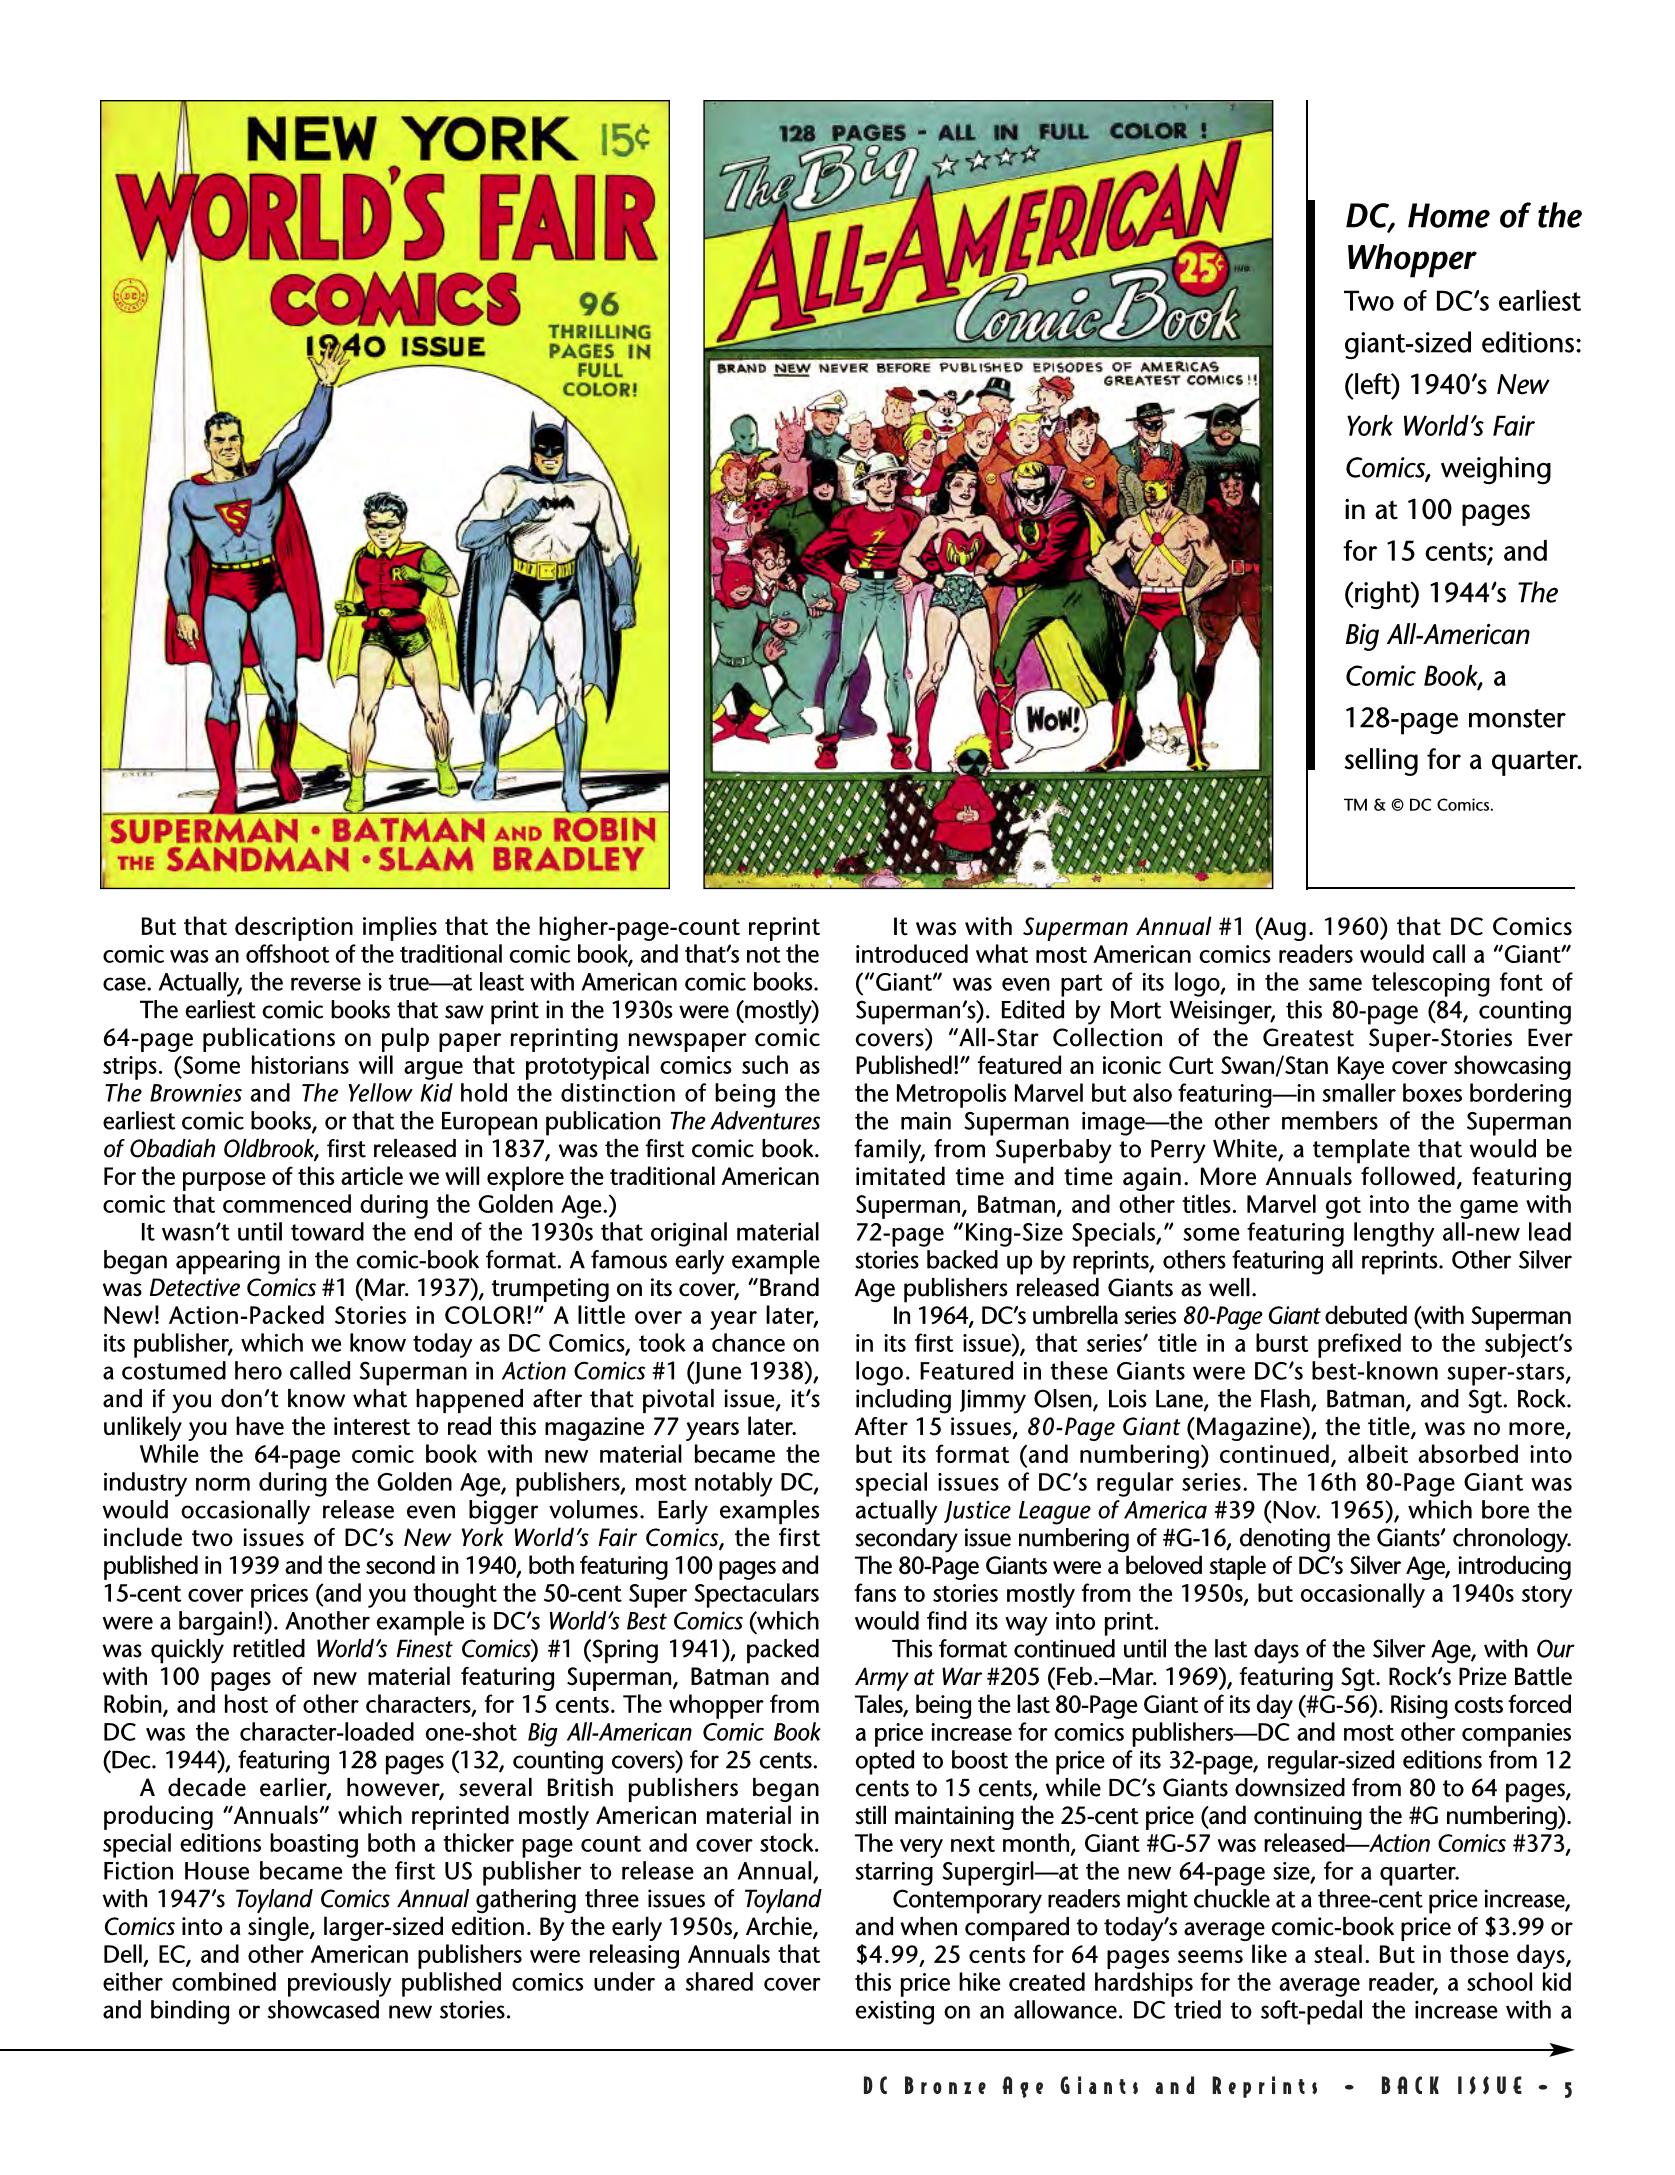 Read online Back Issue comic -  Issue #81 - 7